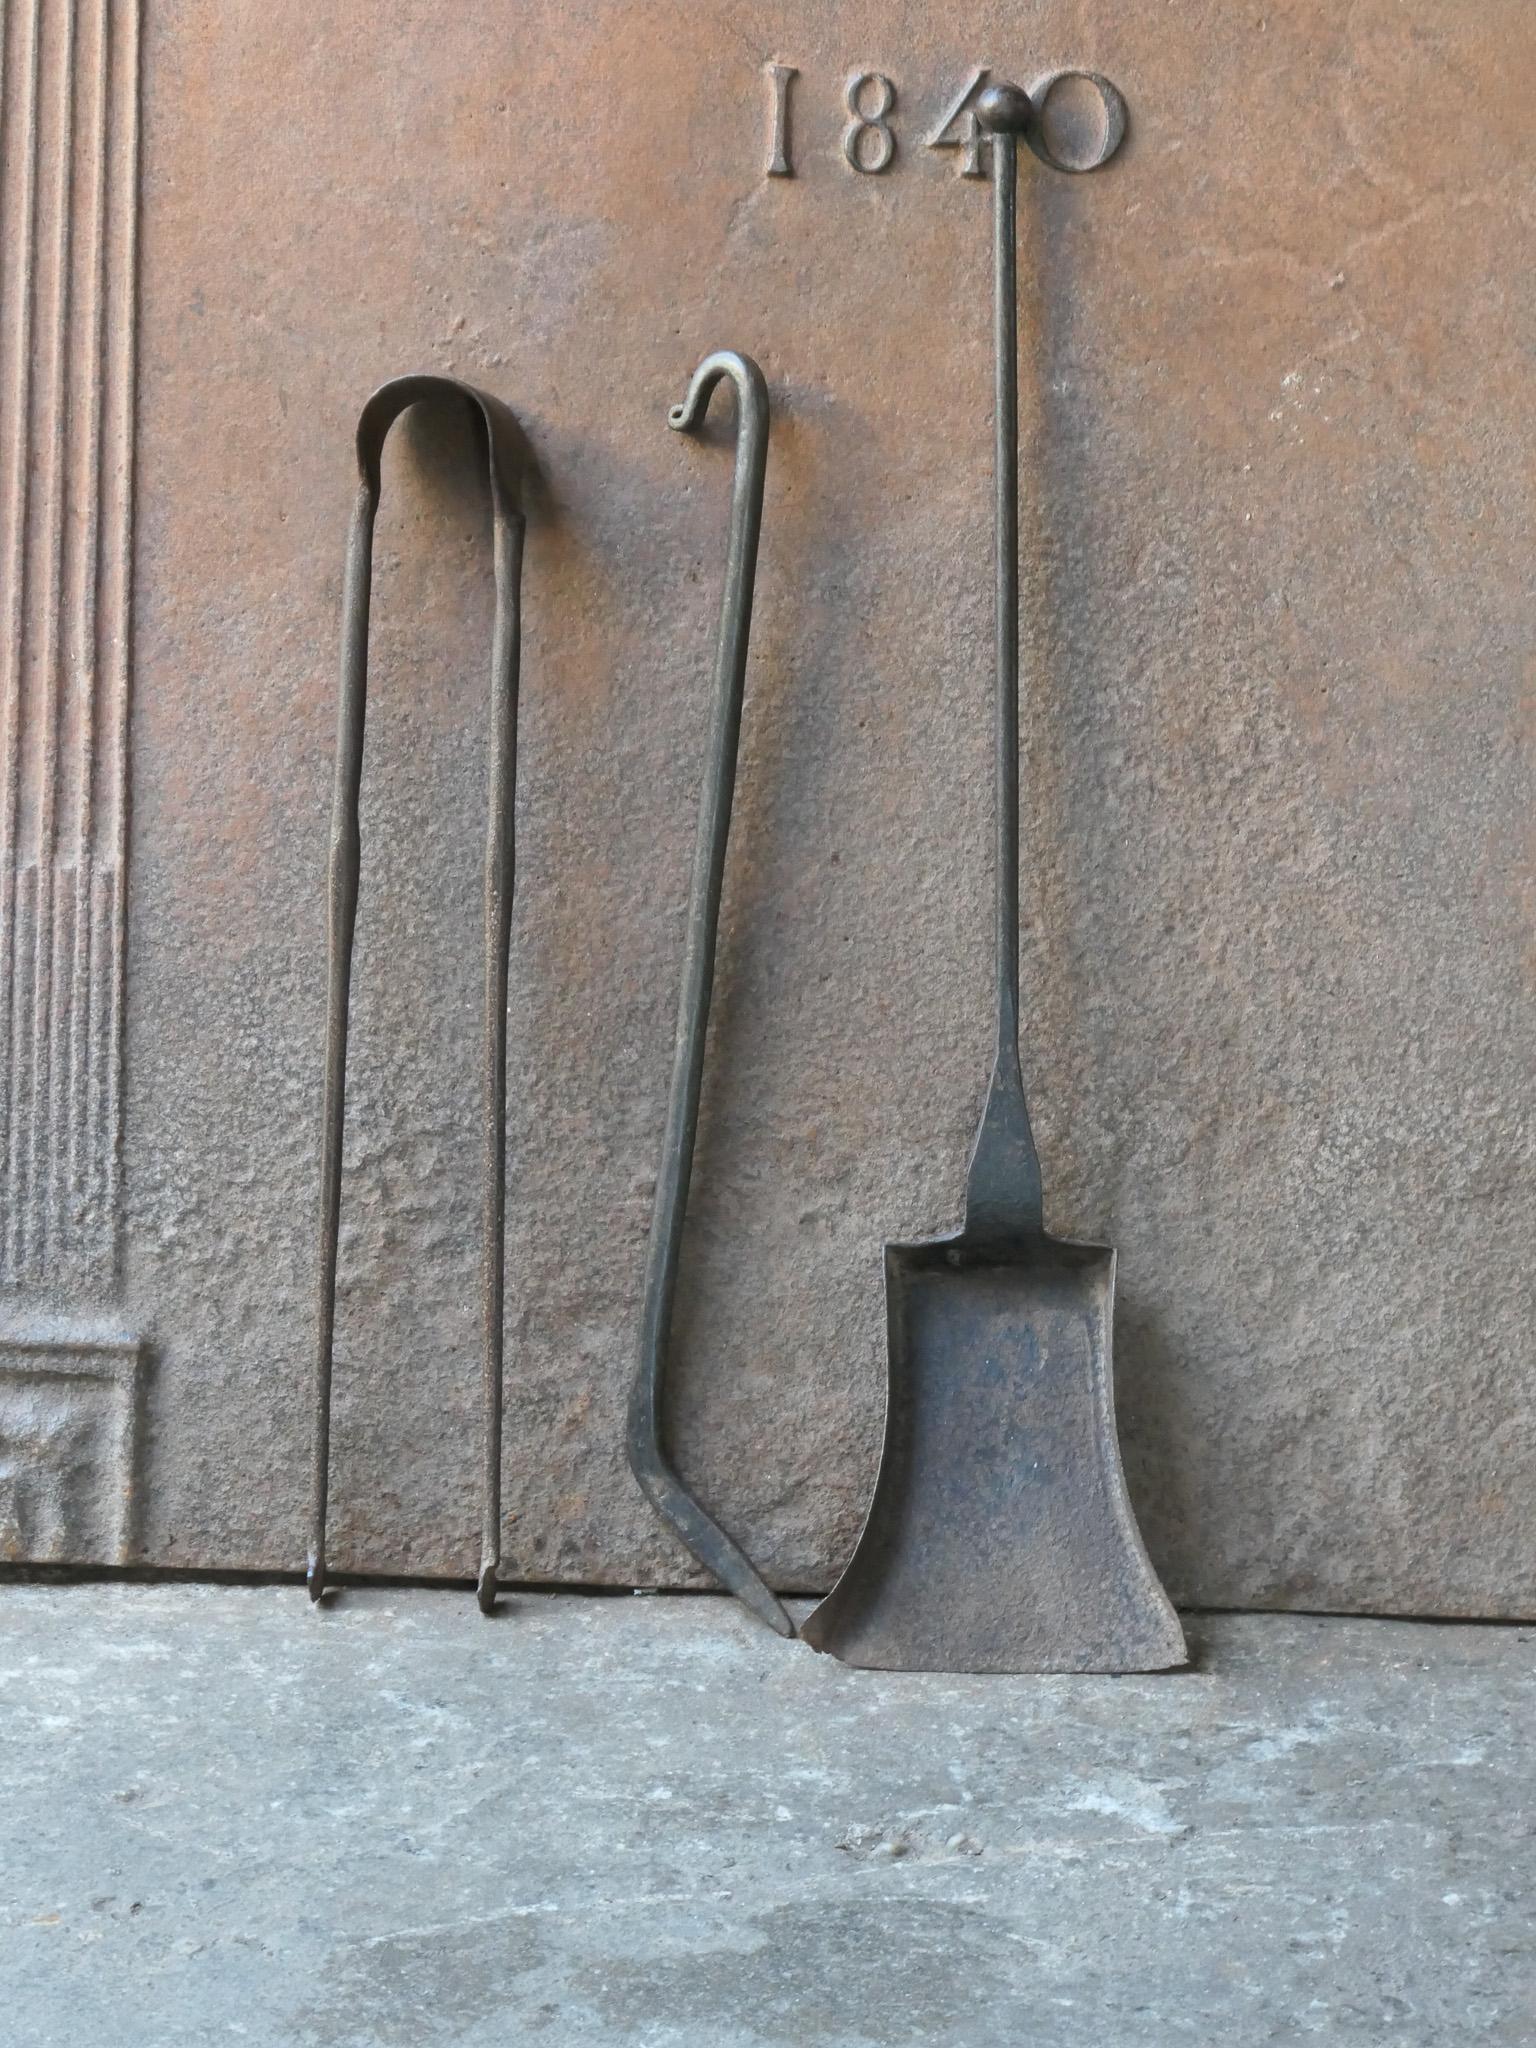 Rustic 18th-19th century French fireplace tool set. The tool set consists of fireplace tongs, shovel and a fire poker. The tools are made of wrought iron. The set is in a good condition and fit for use in the fireplace.